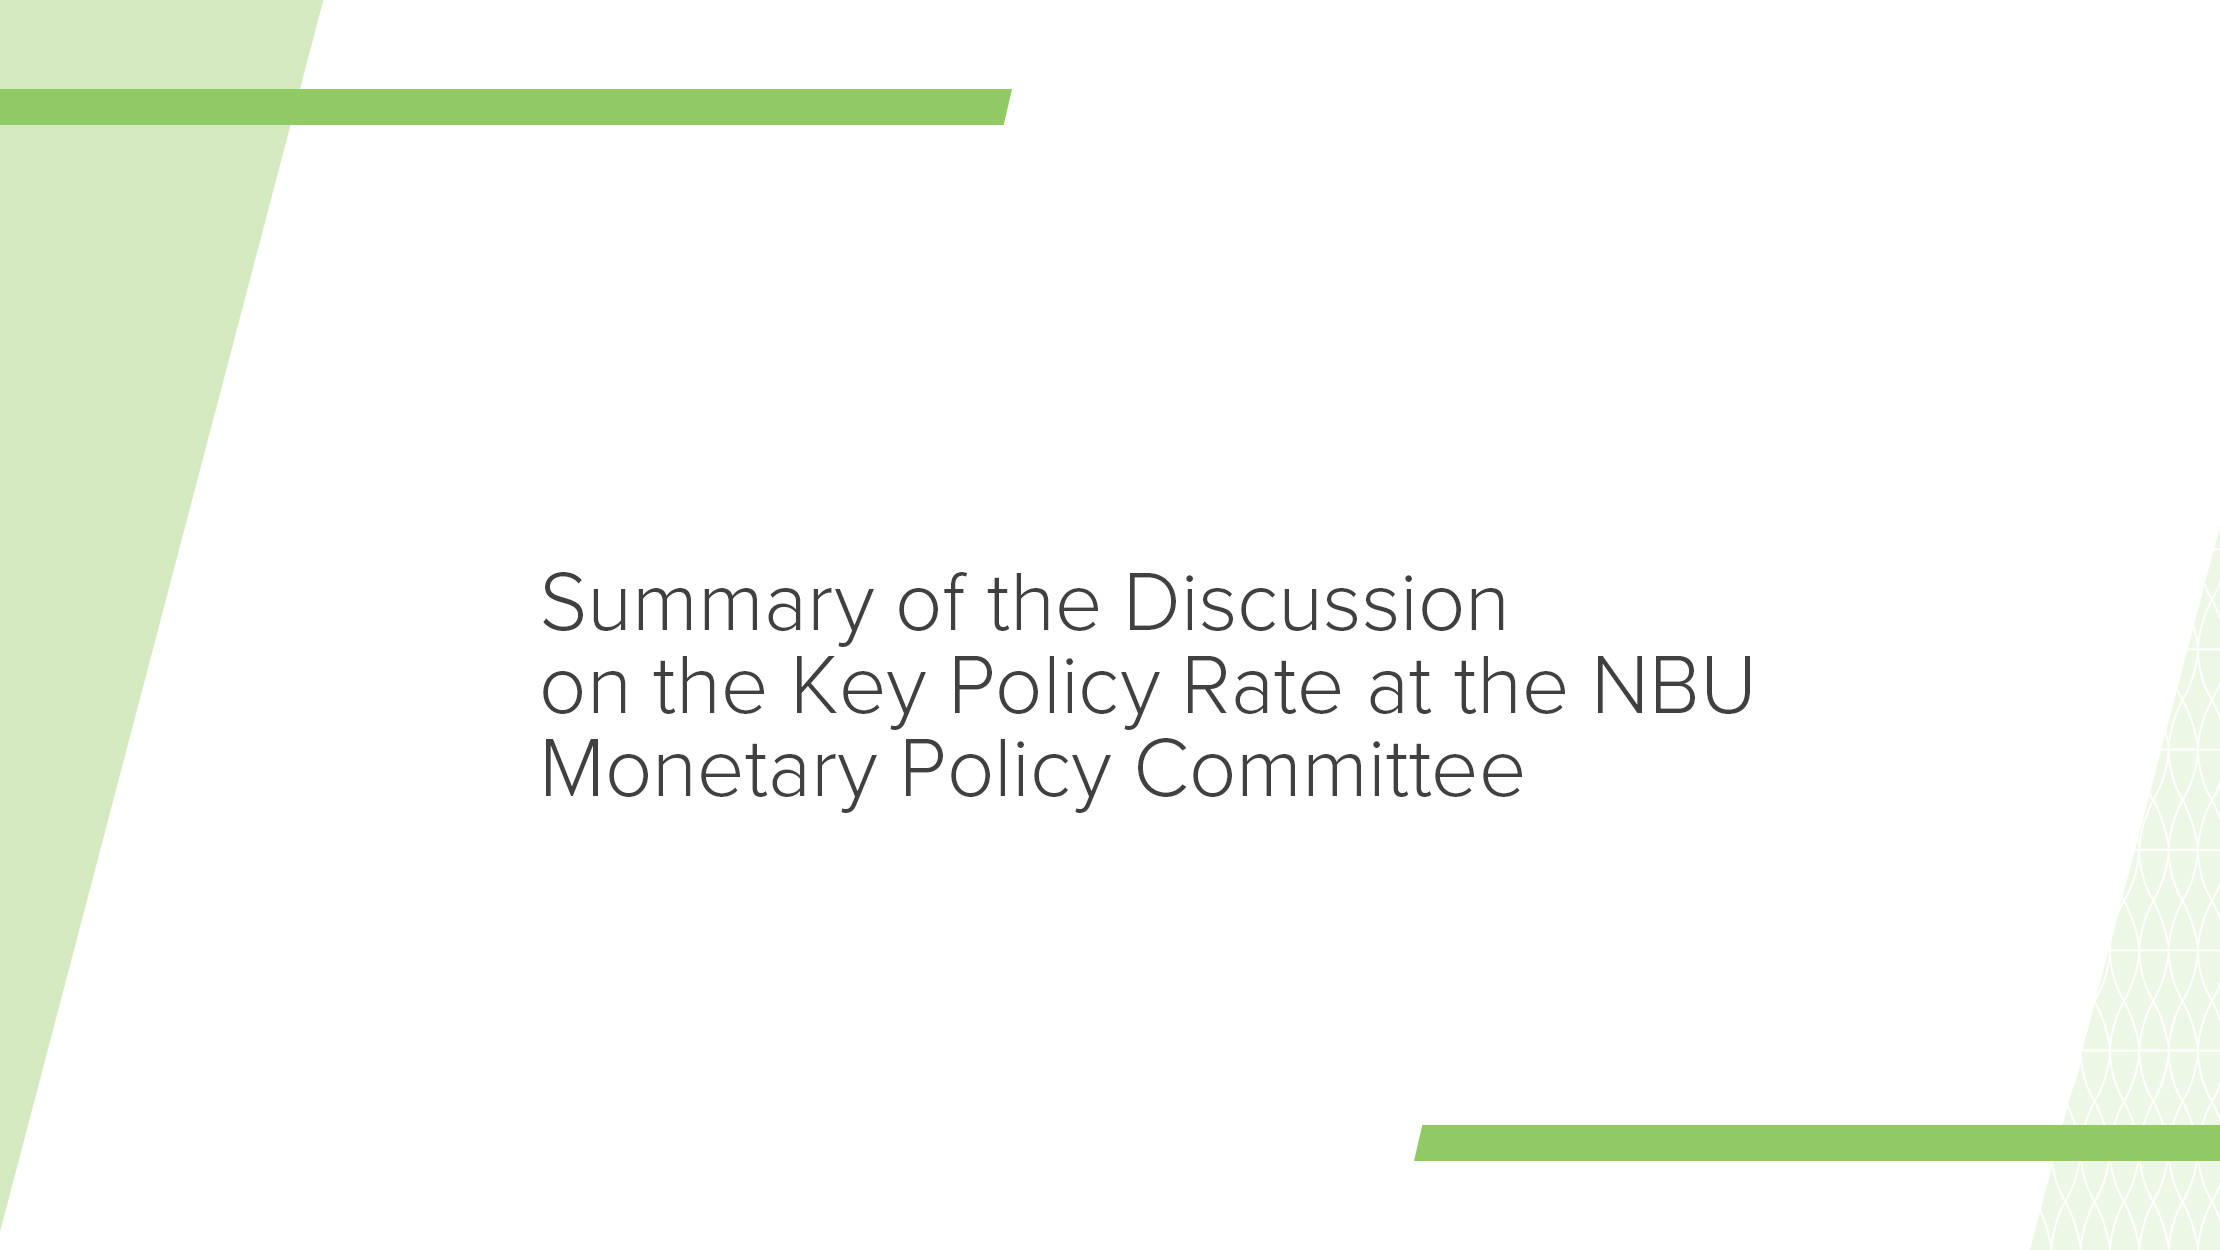 Summary of the Key Policy Rate Discussion by the NBU Monetary Policy Committee 22 April 2020